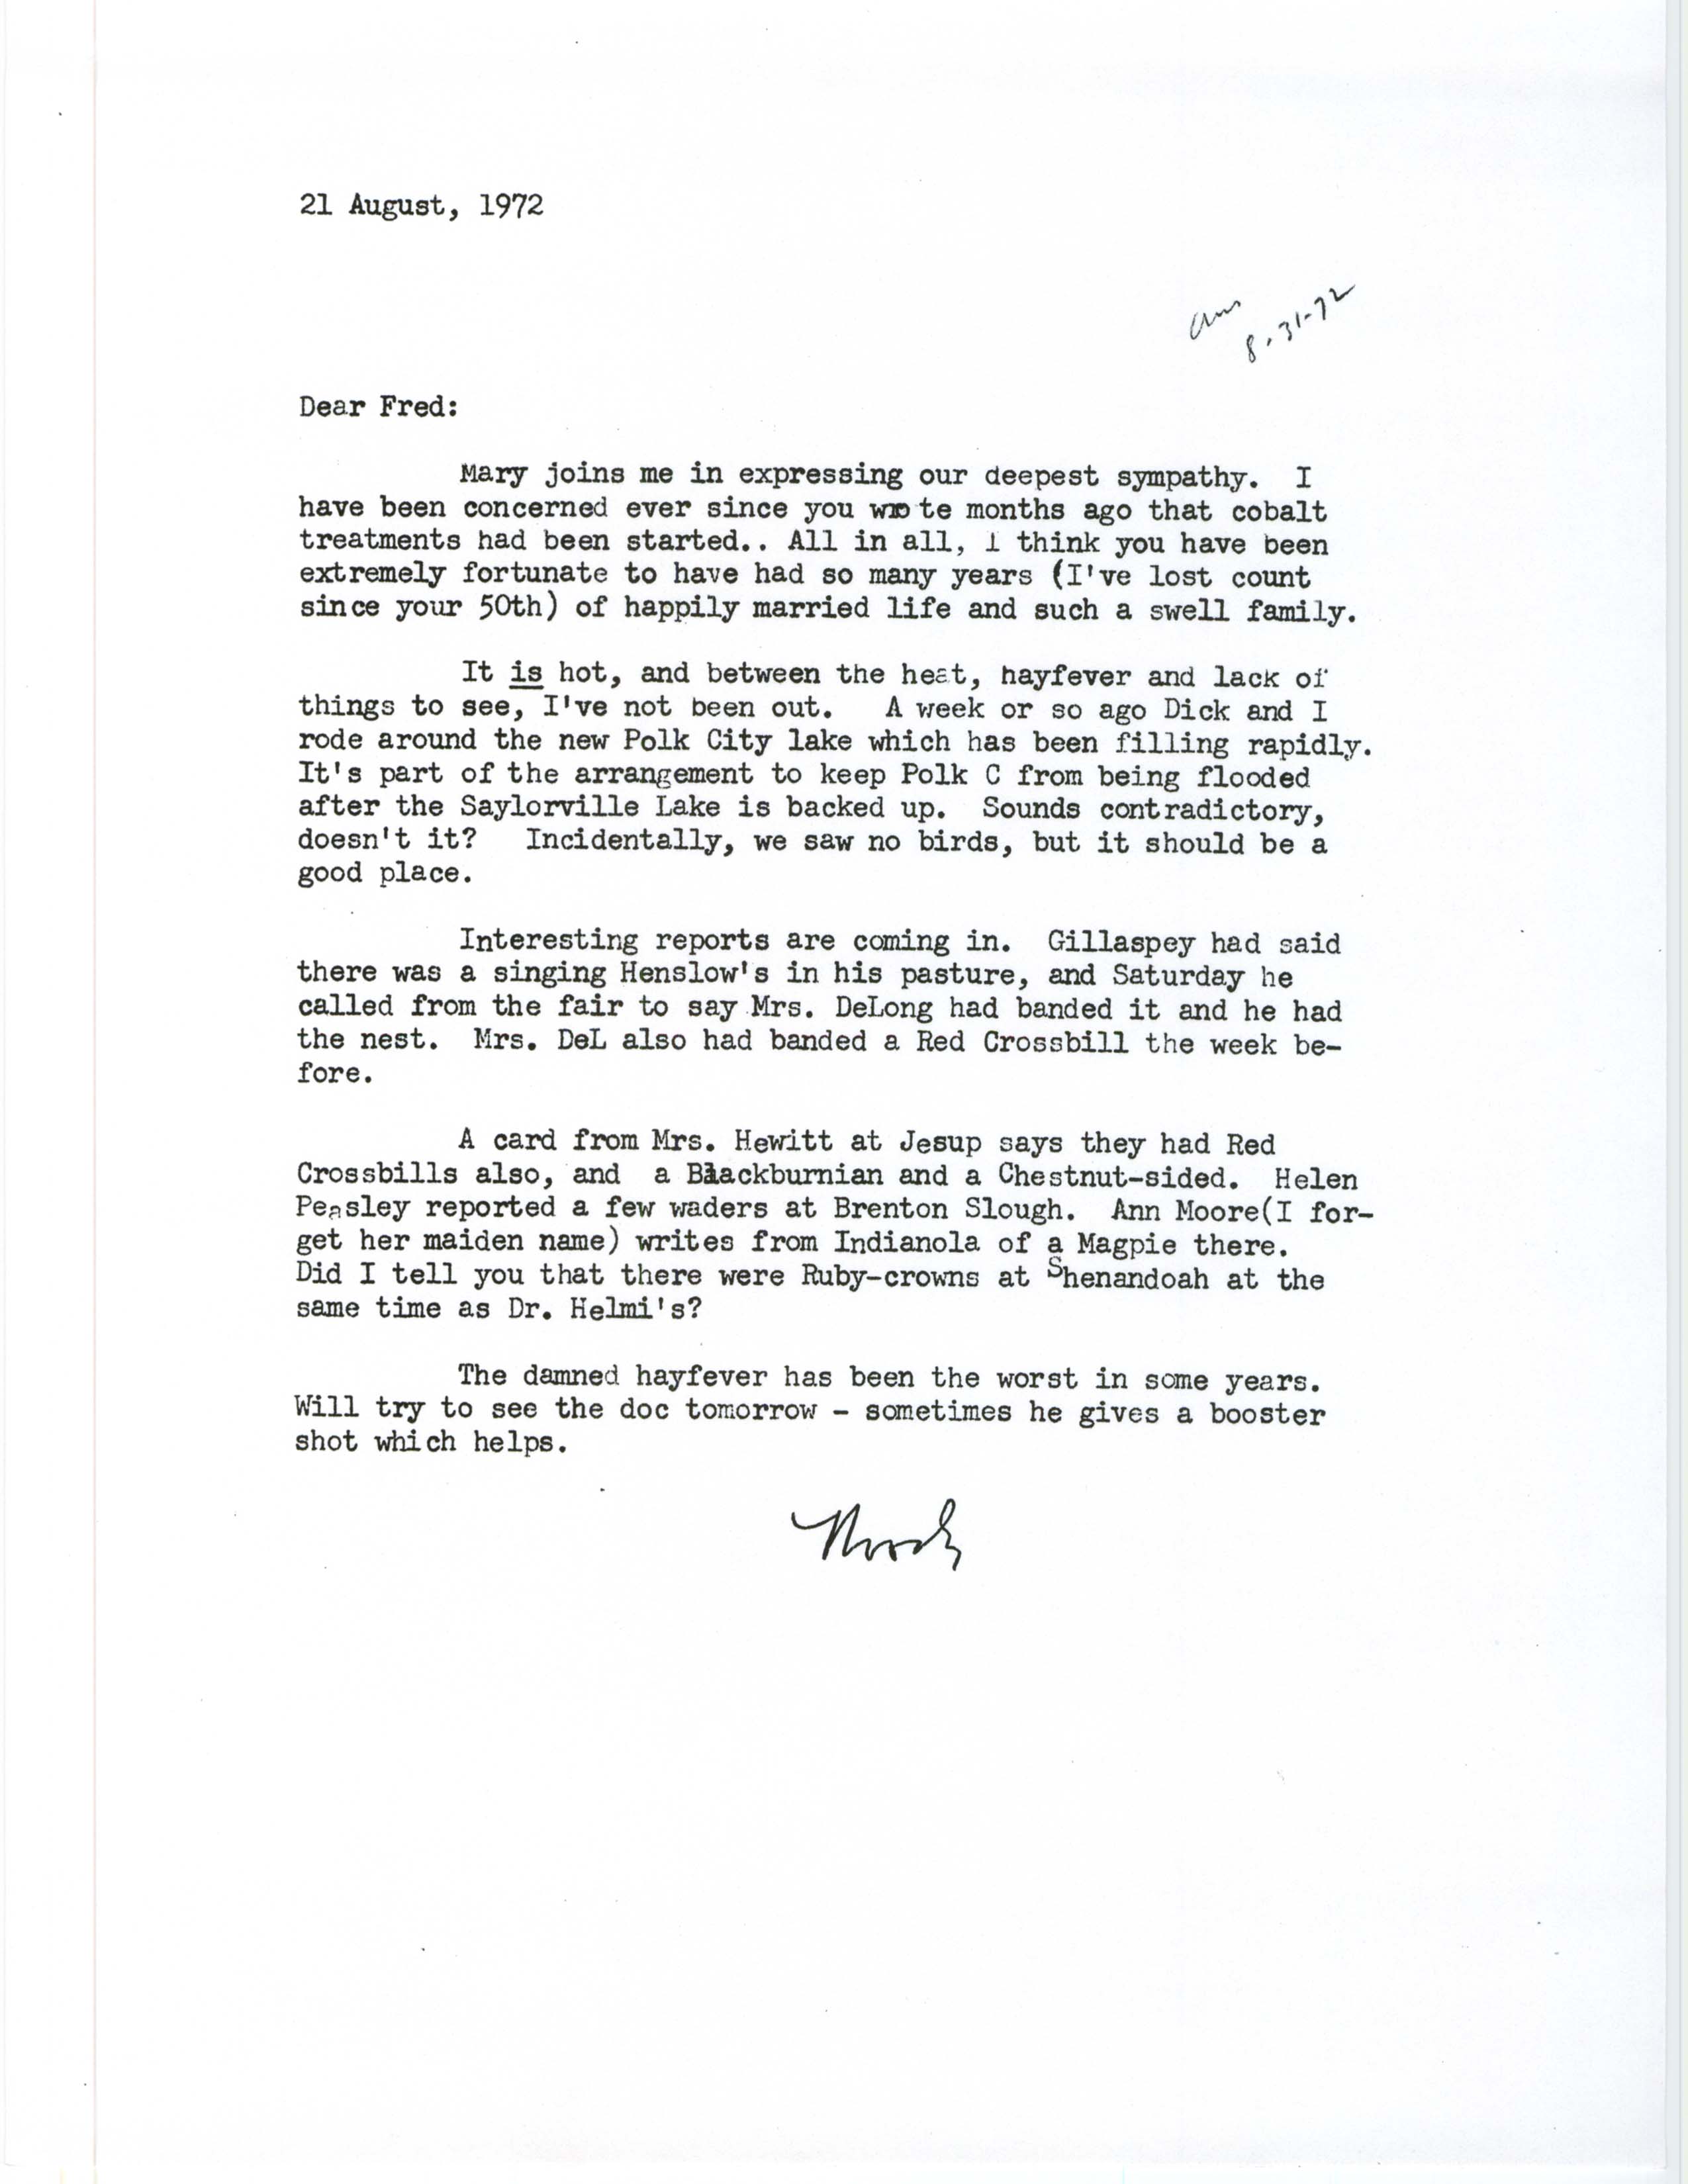 Woodward H. Brown letter to Fred Kent regarding bird sightings for the summer of 1972, August 21, 1972